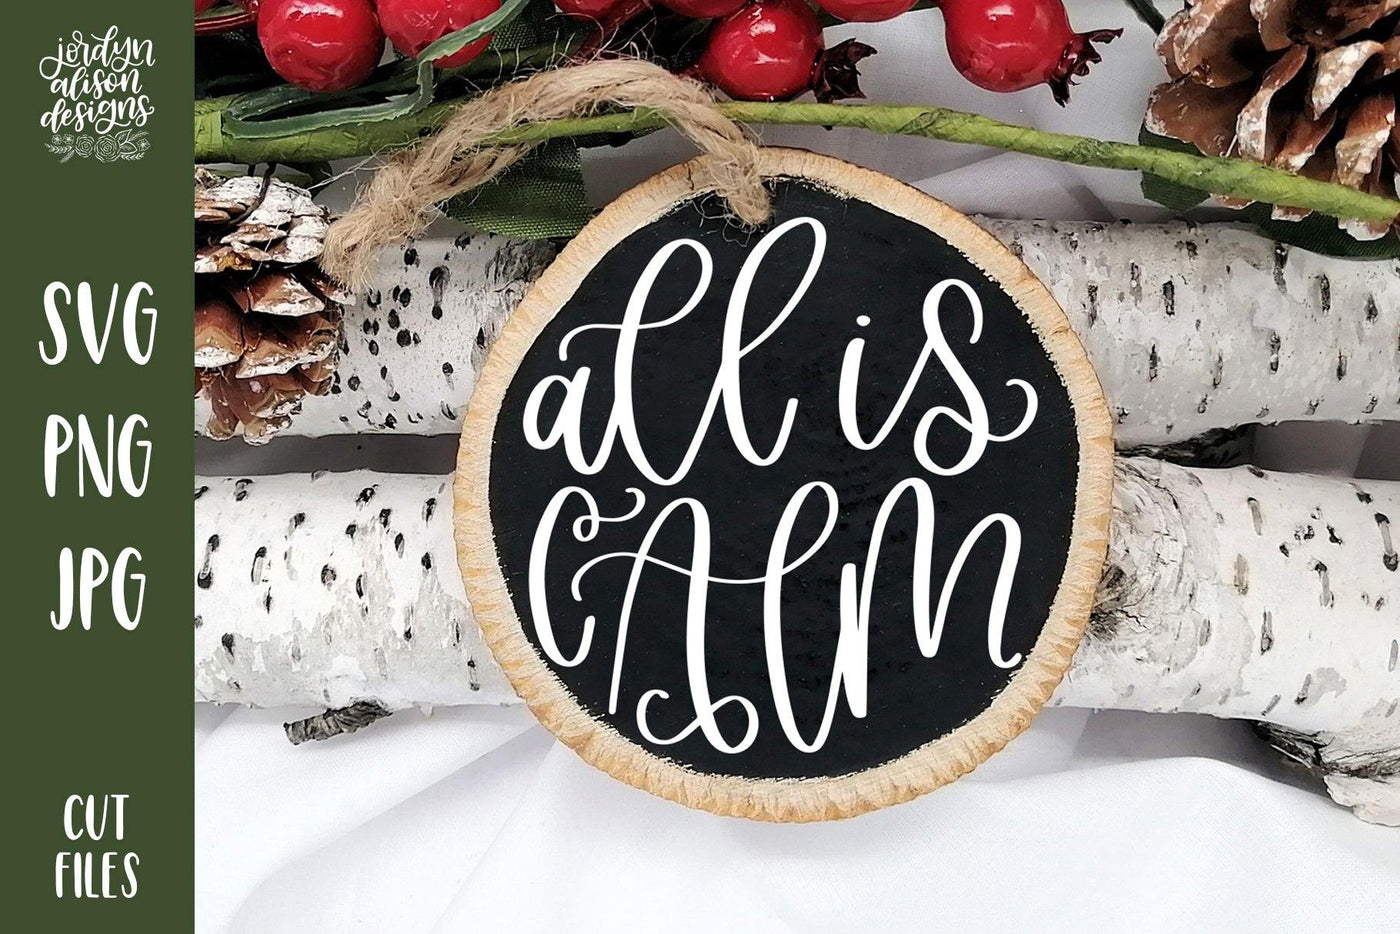 All is Calm handwritten on Round Christmas ornament